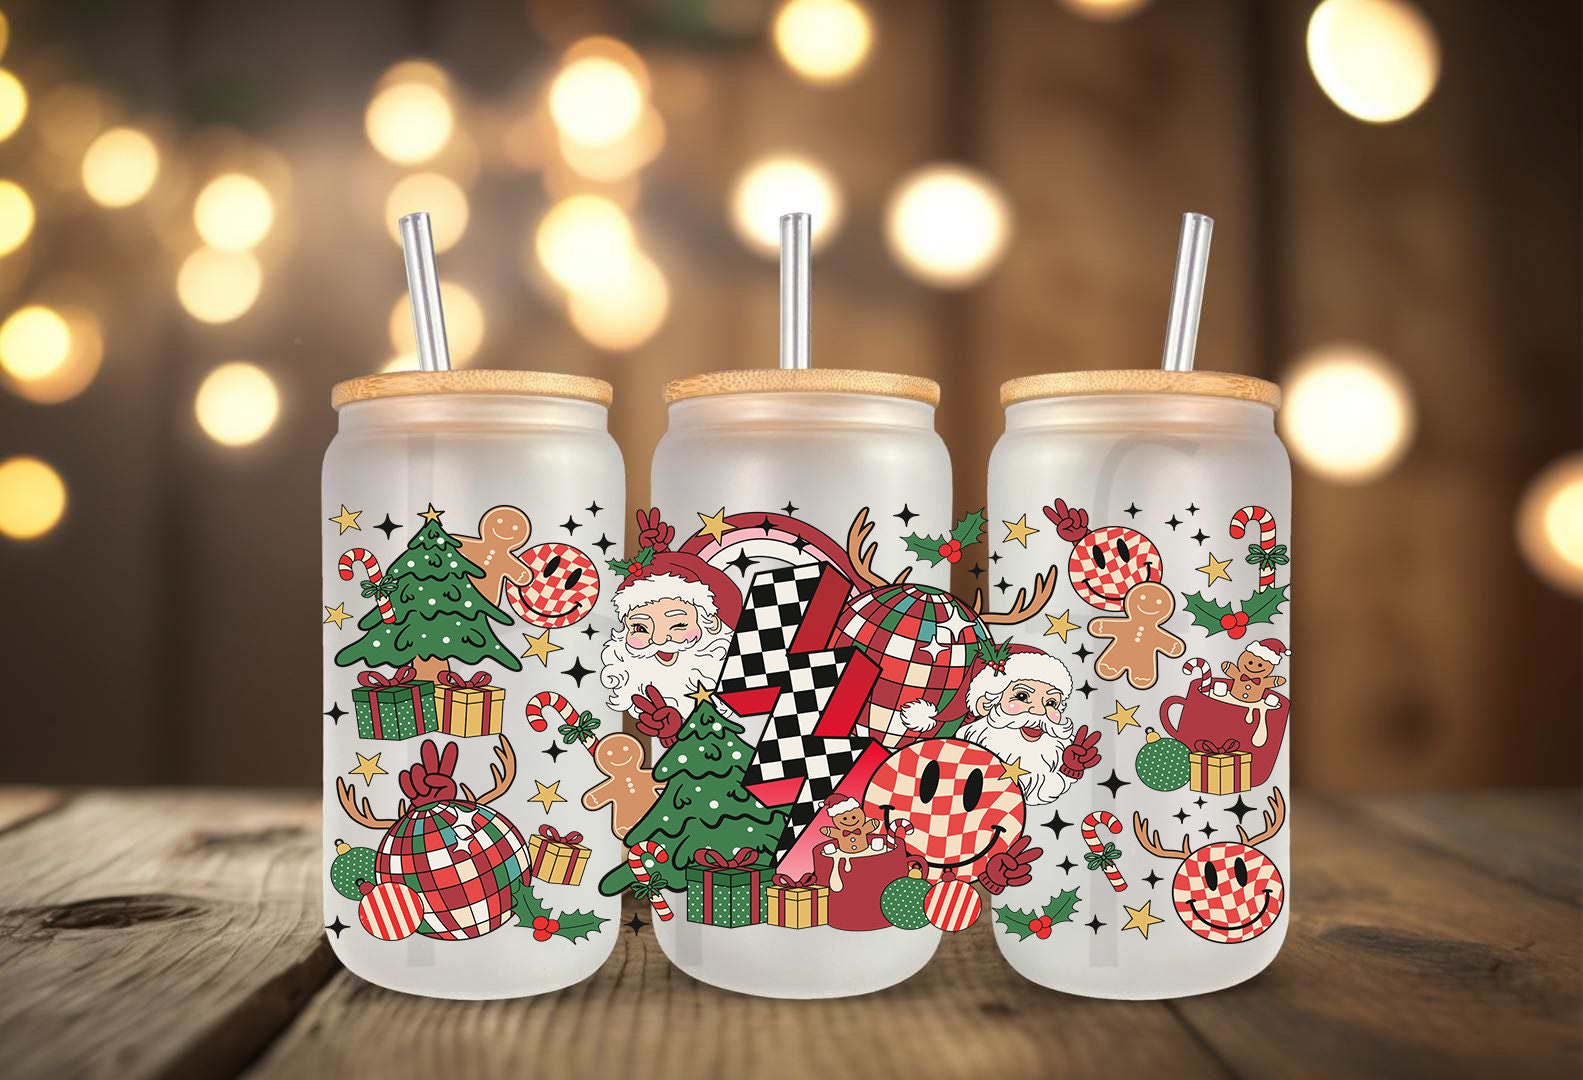 Christmas UV DTF Cup Wrap, Uv Dtf Decals, Ready to Use Wrap